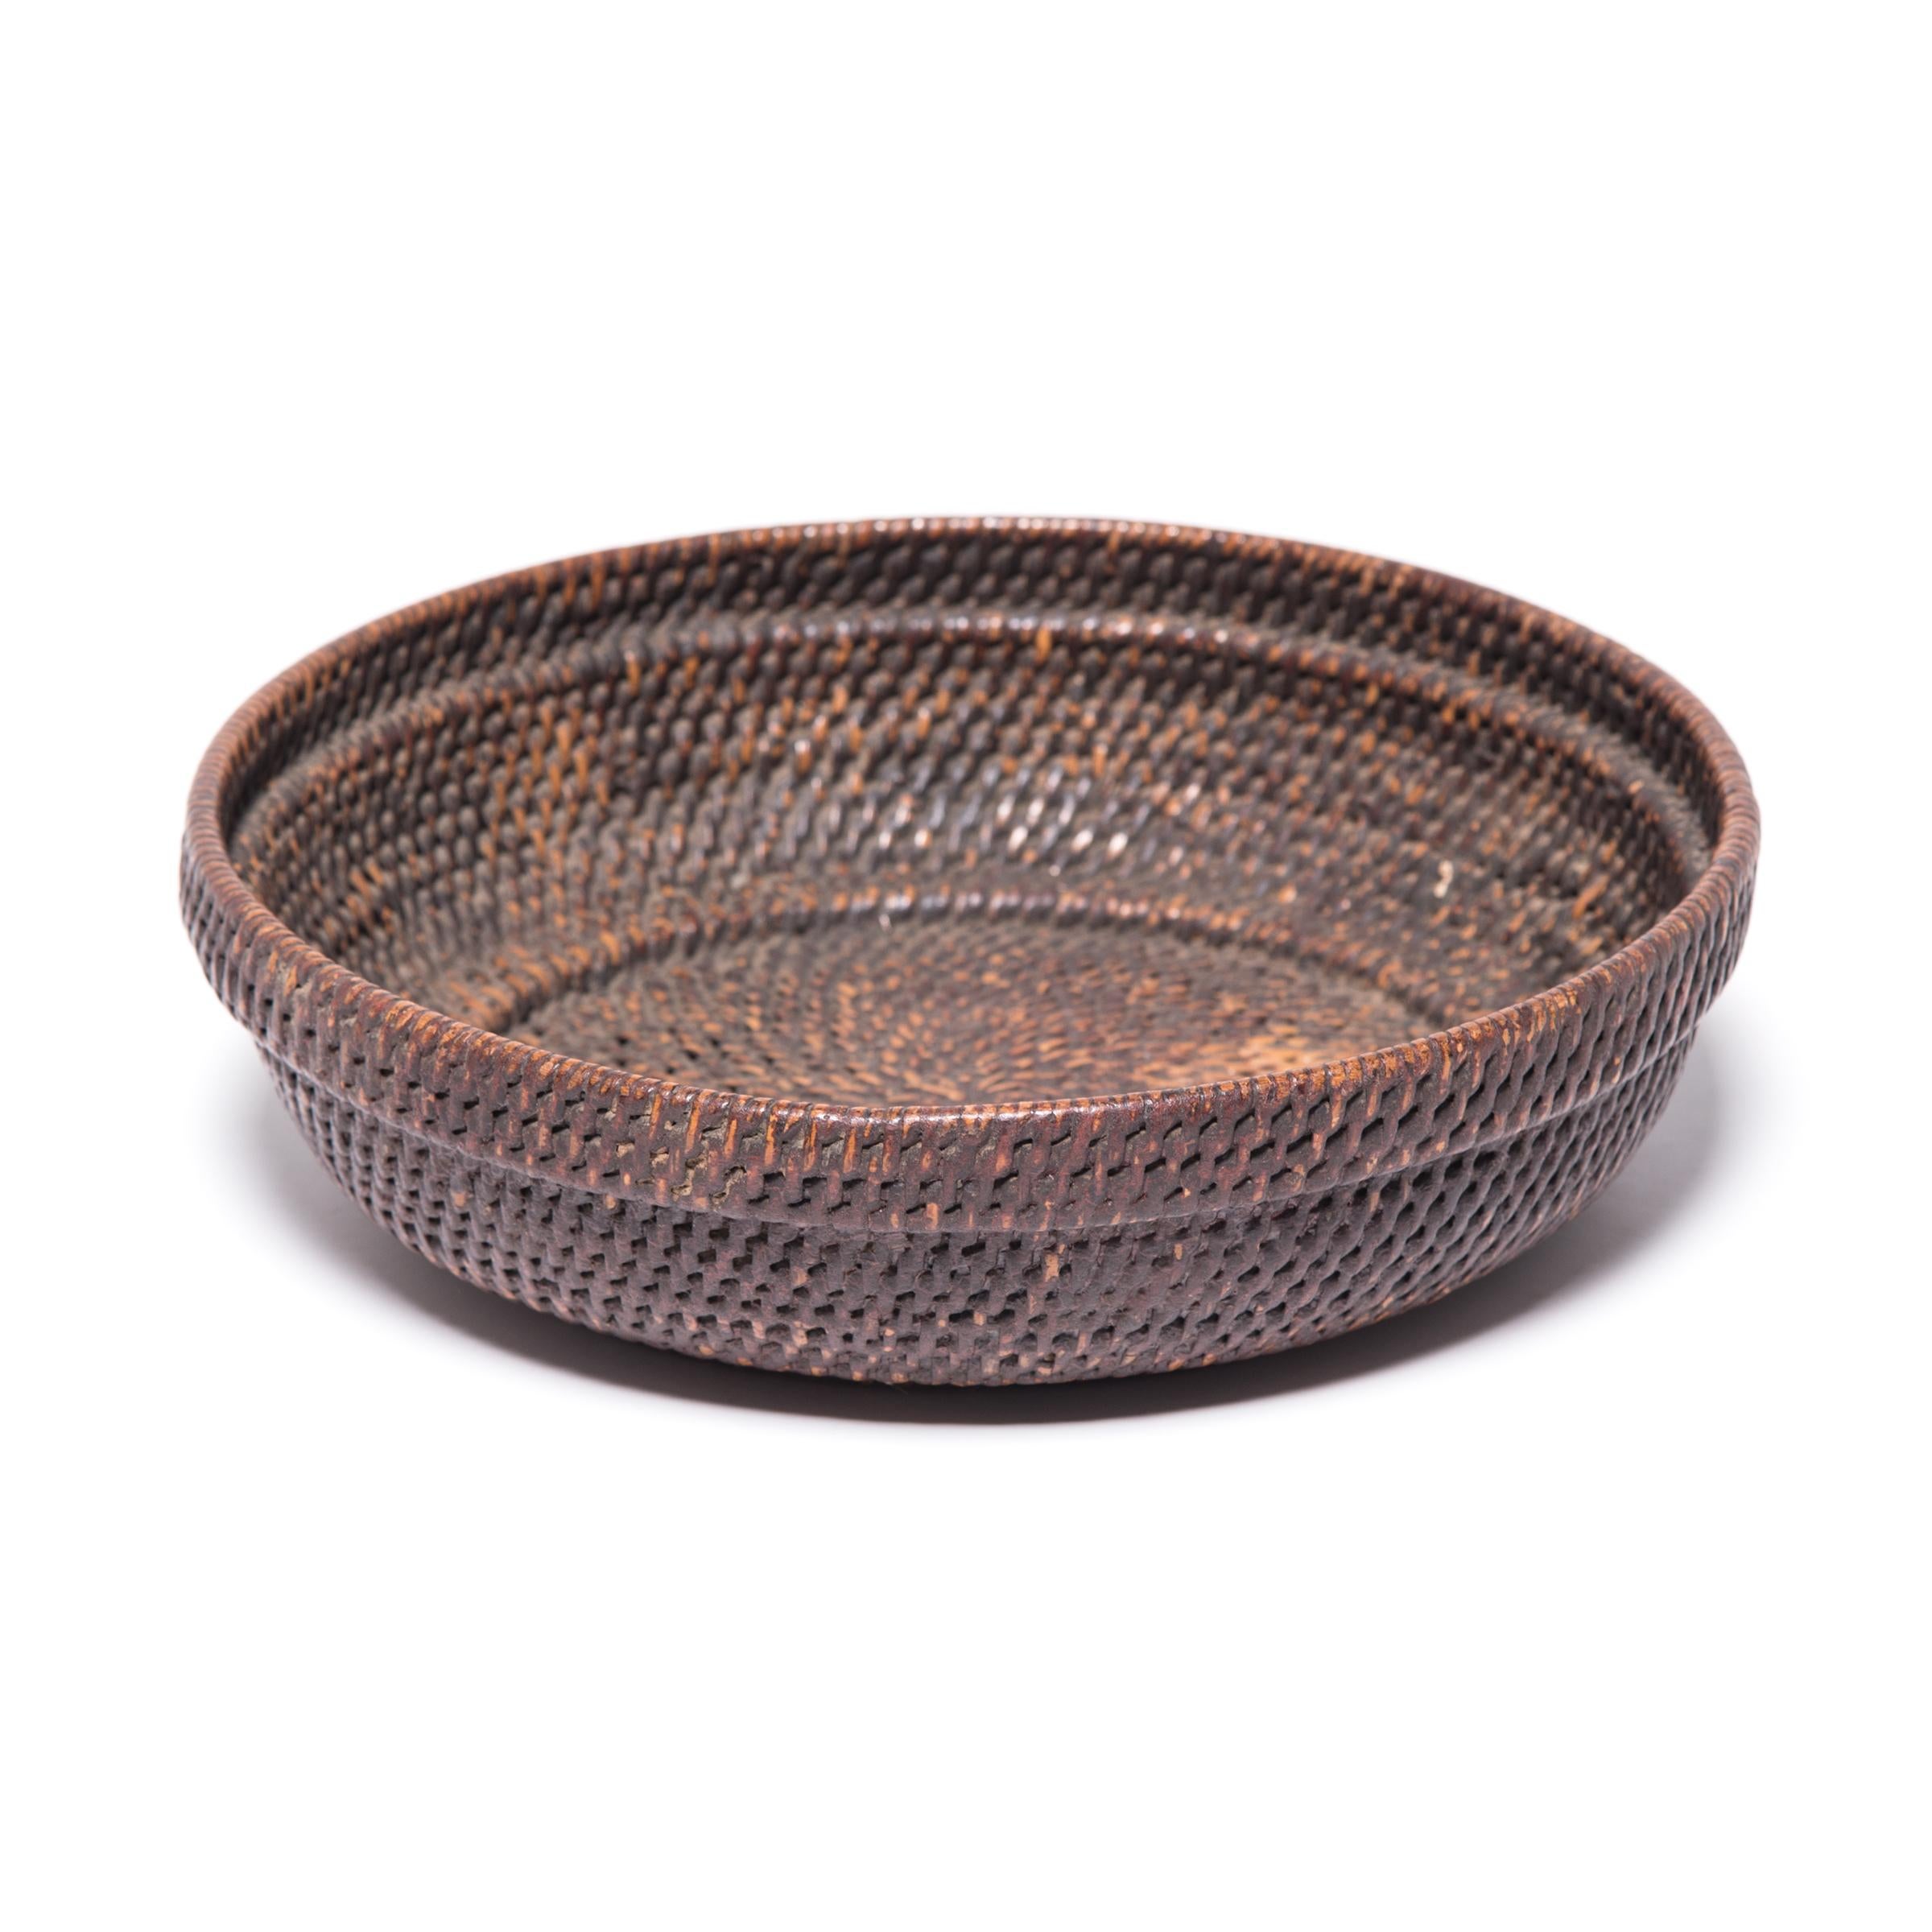 Qing Early 20th Century Woven Offering Tray Basket